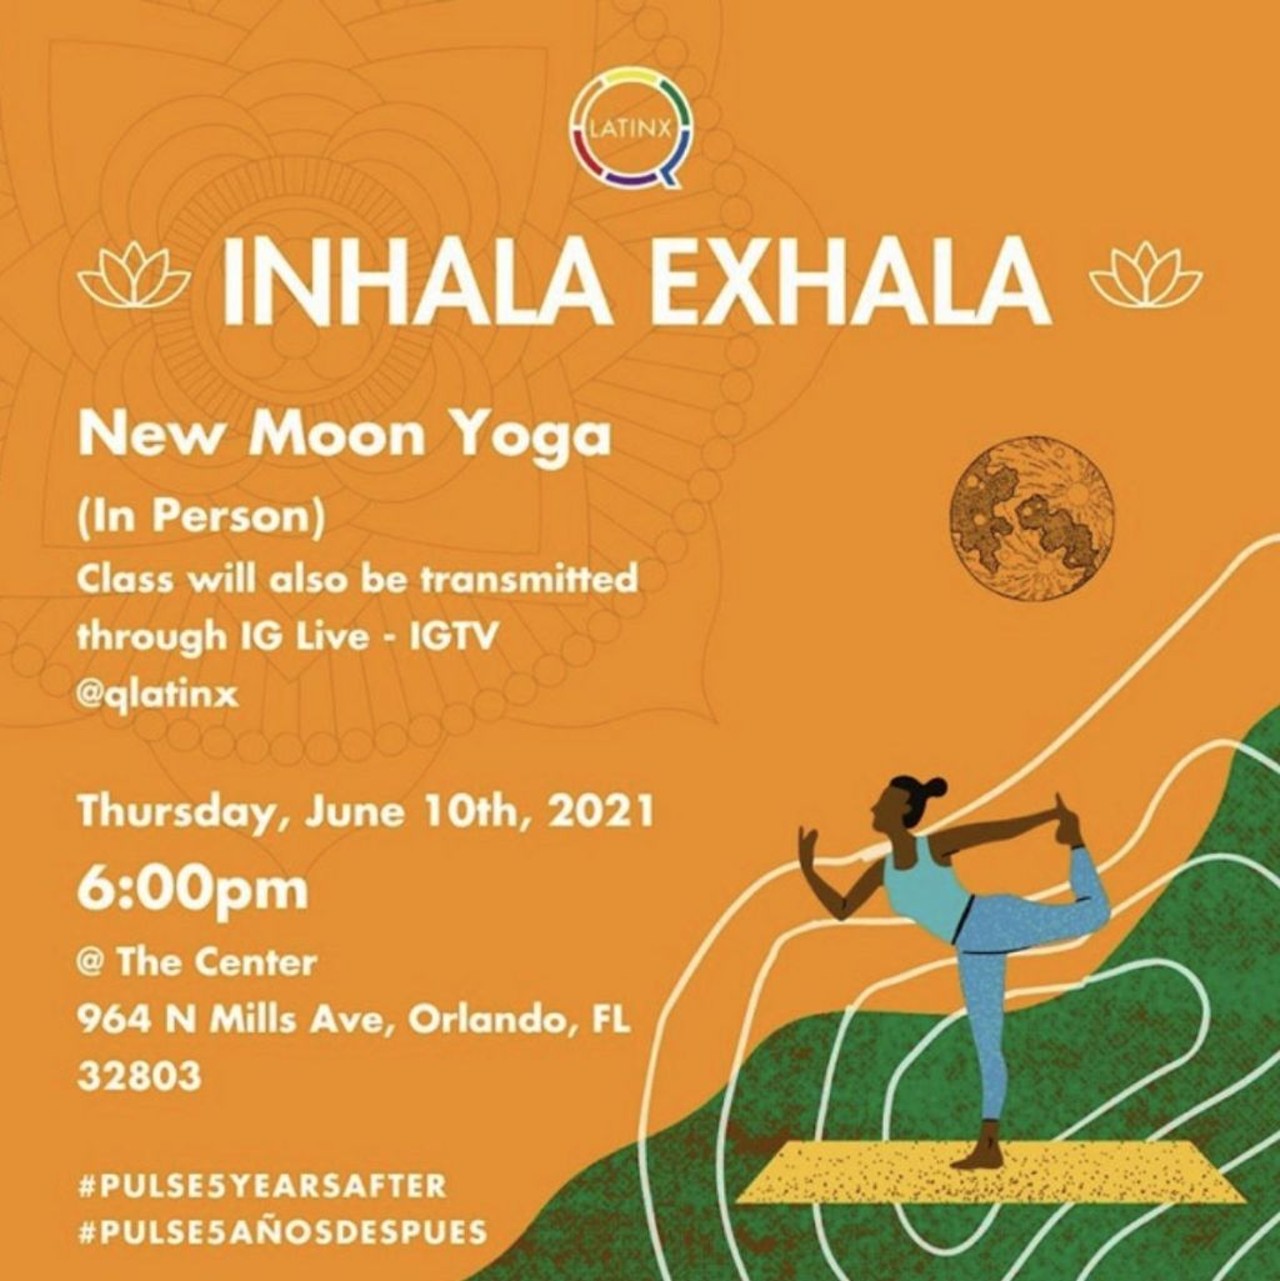 Inhala Exhala 
June 10th 6:00 p.m. 964 N Mills Avenue. 
Inhala Exhala is an event meant to bring the community together to practice restorative yoga, a way to acknowledge, channel, and transform your emotions. 
Photo via Qlatinx/Instagram